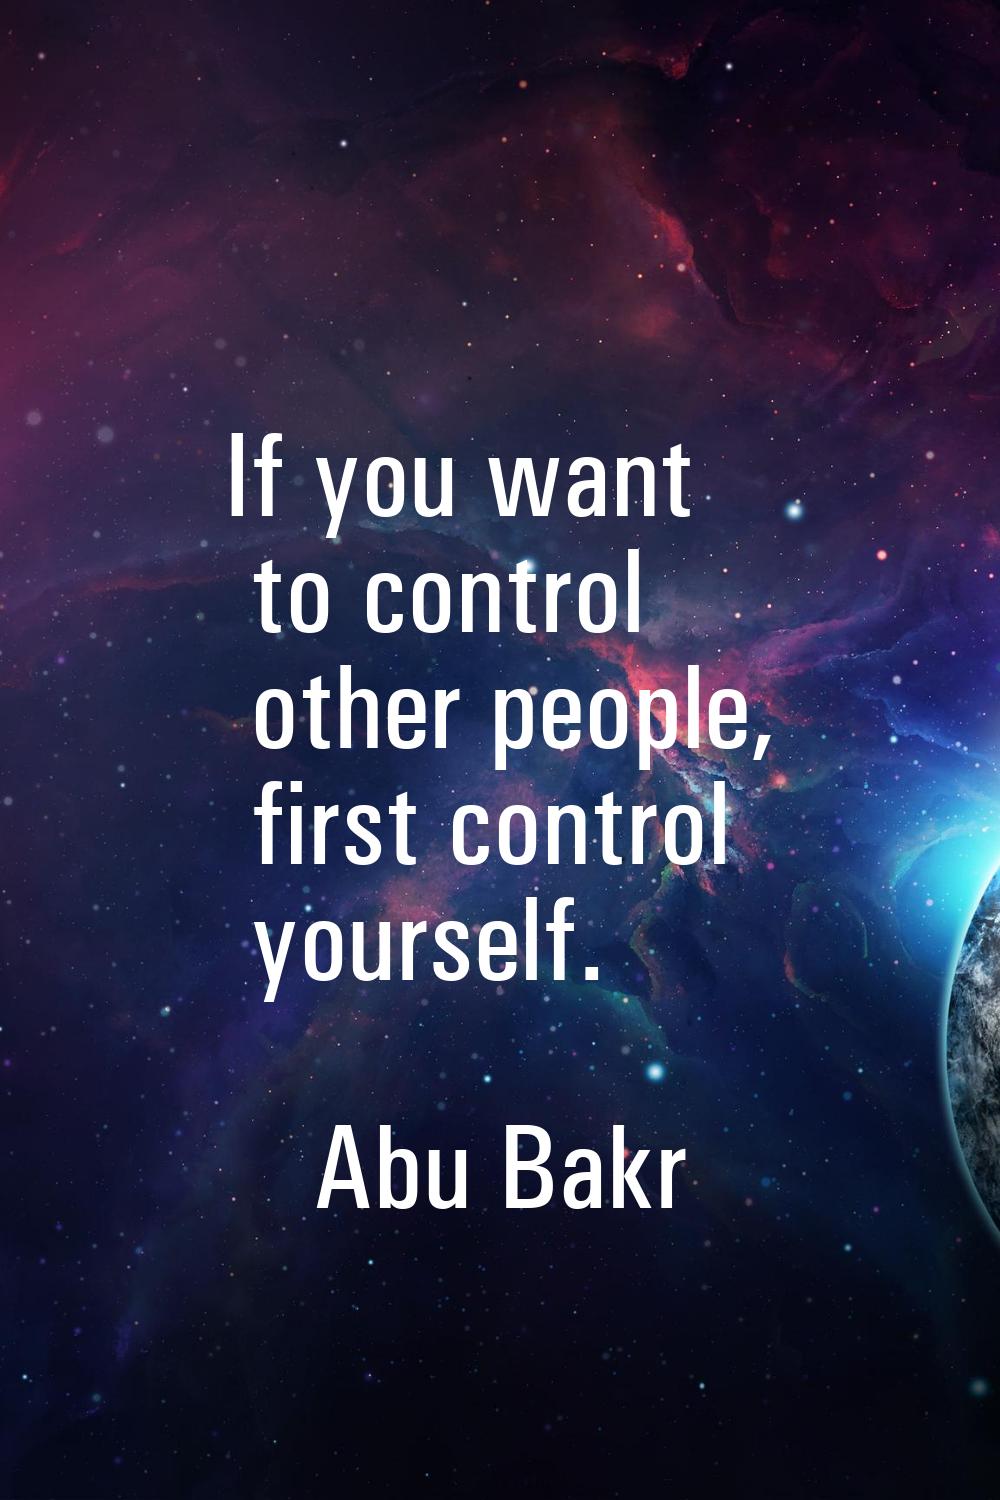 If you want to control other people, first control yourself.